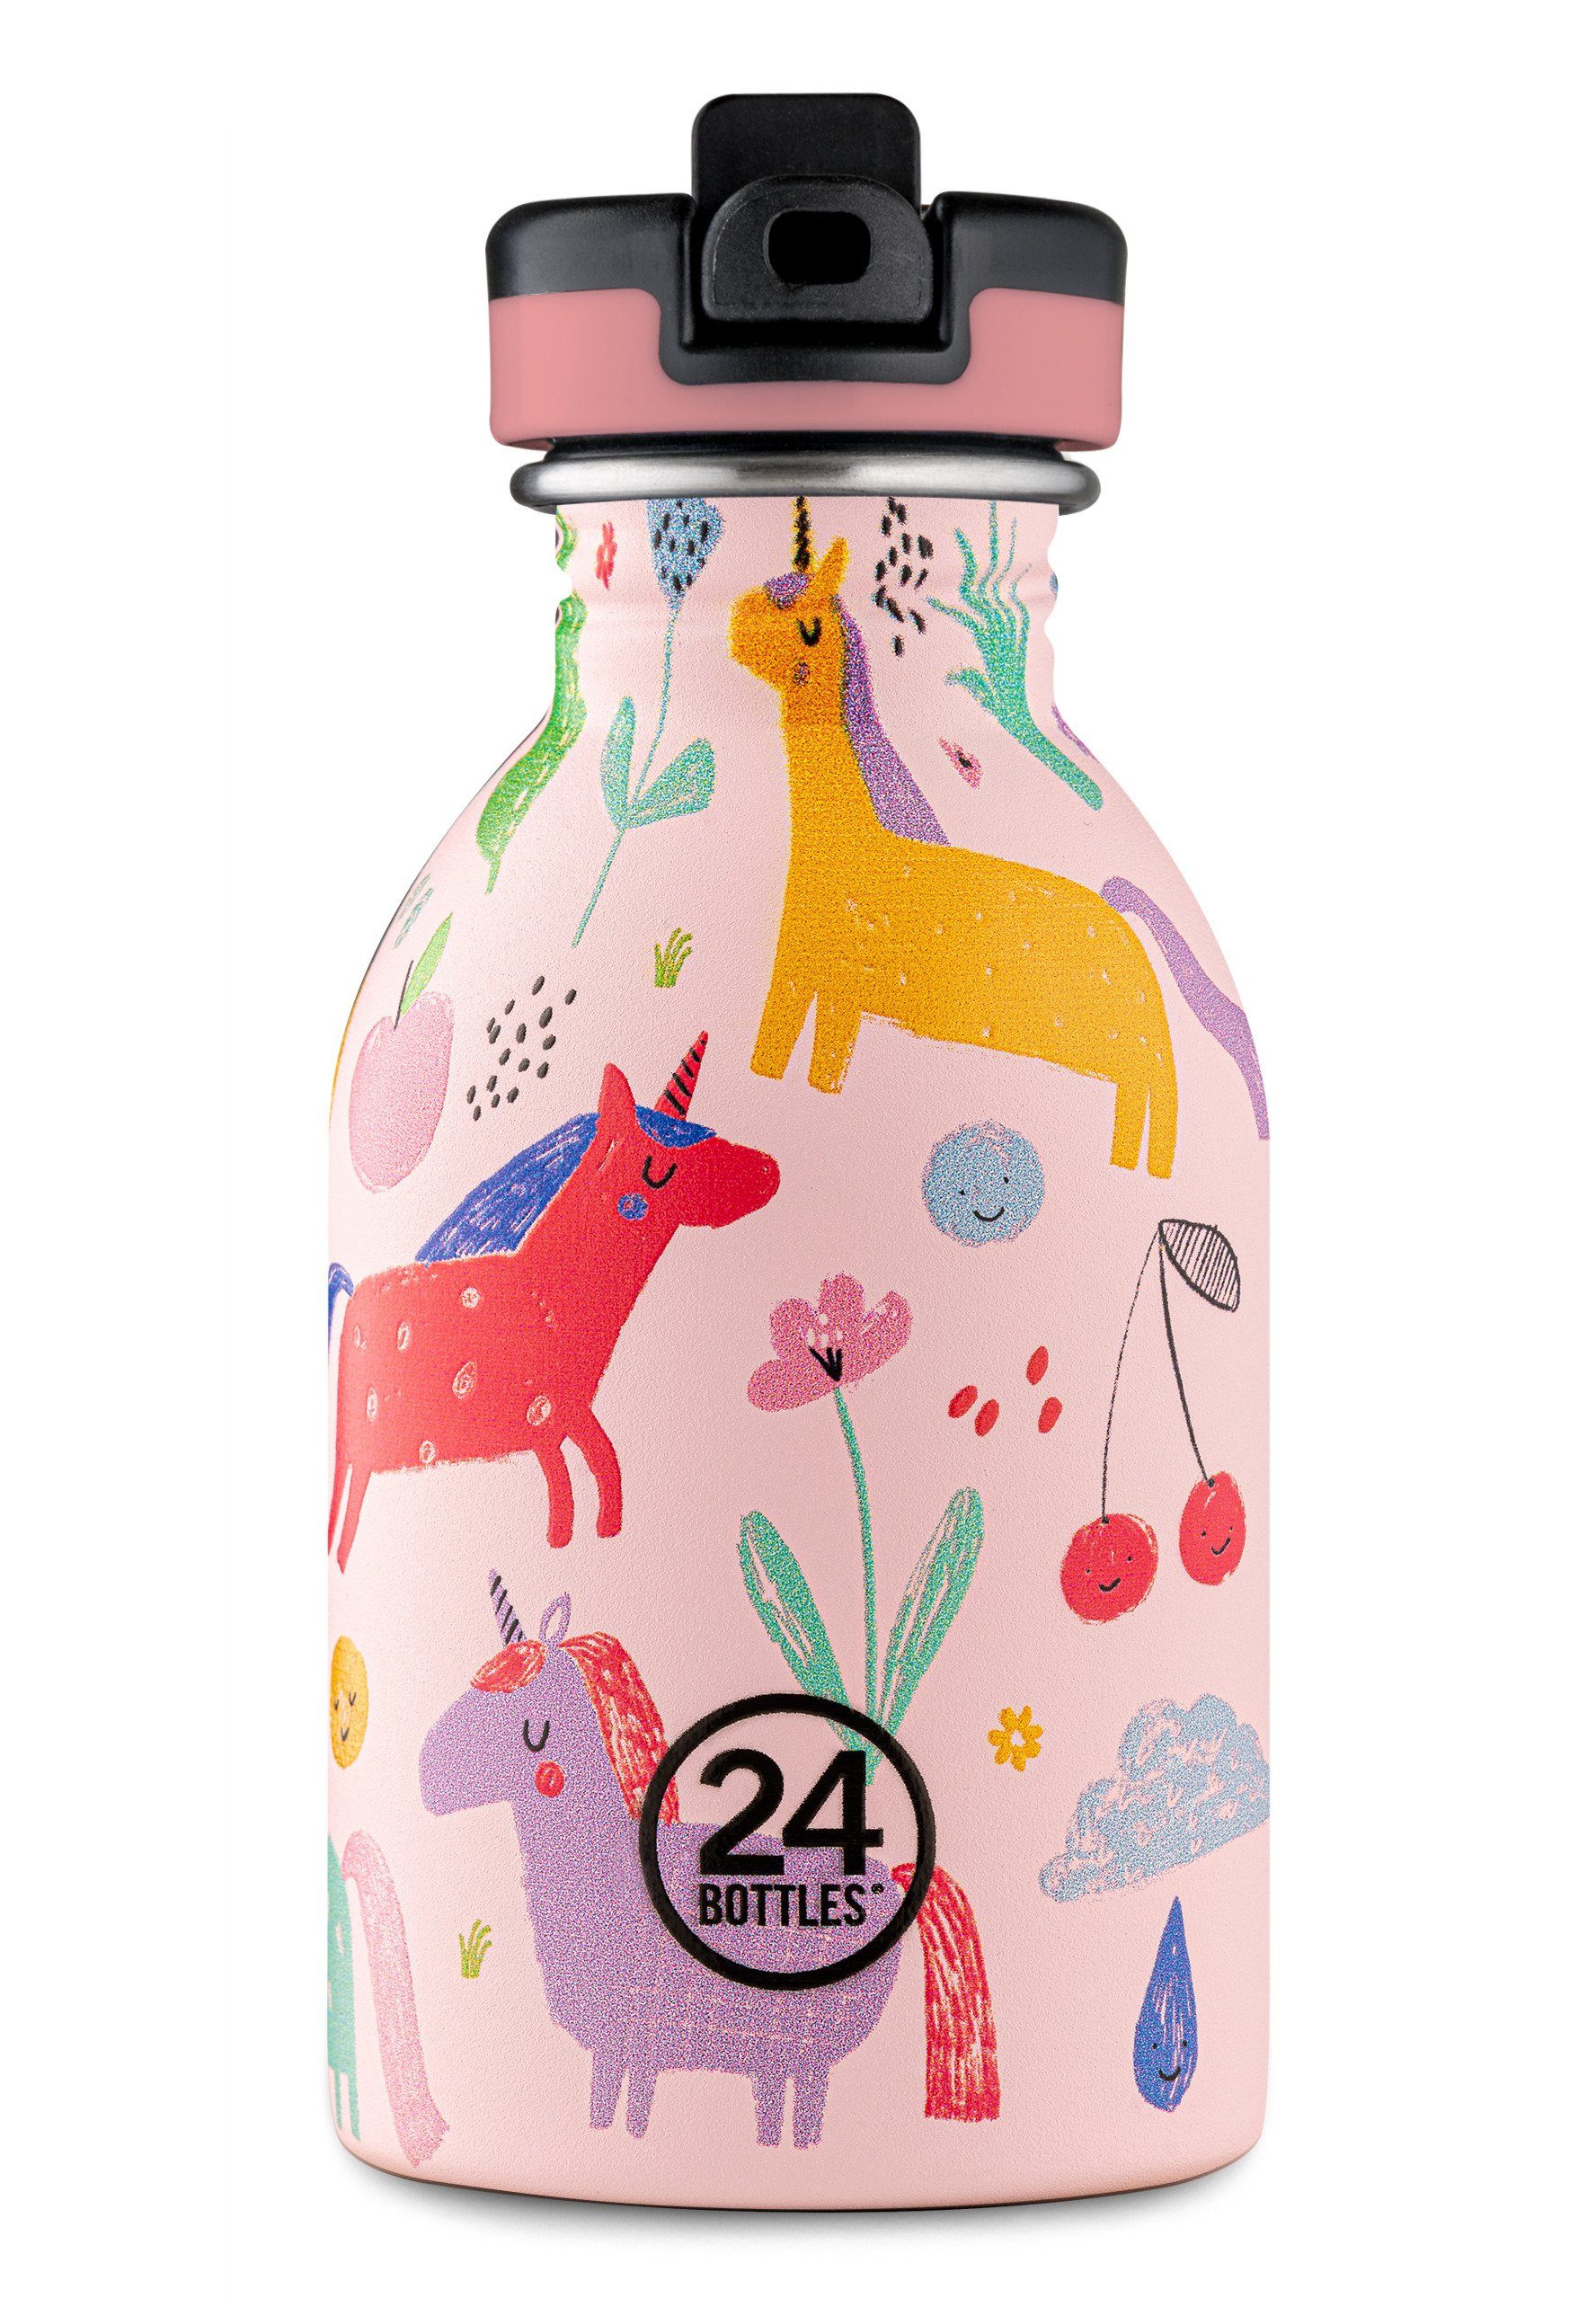 Bottles Colored Trinkflasche with 250 Bottle Magic ml Friends 24 Kids Sport Collection Lid Urban